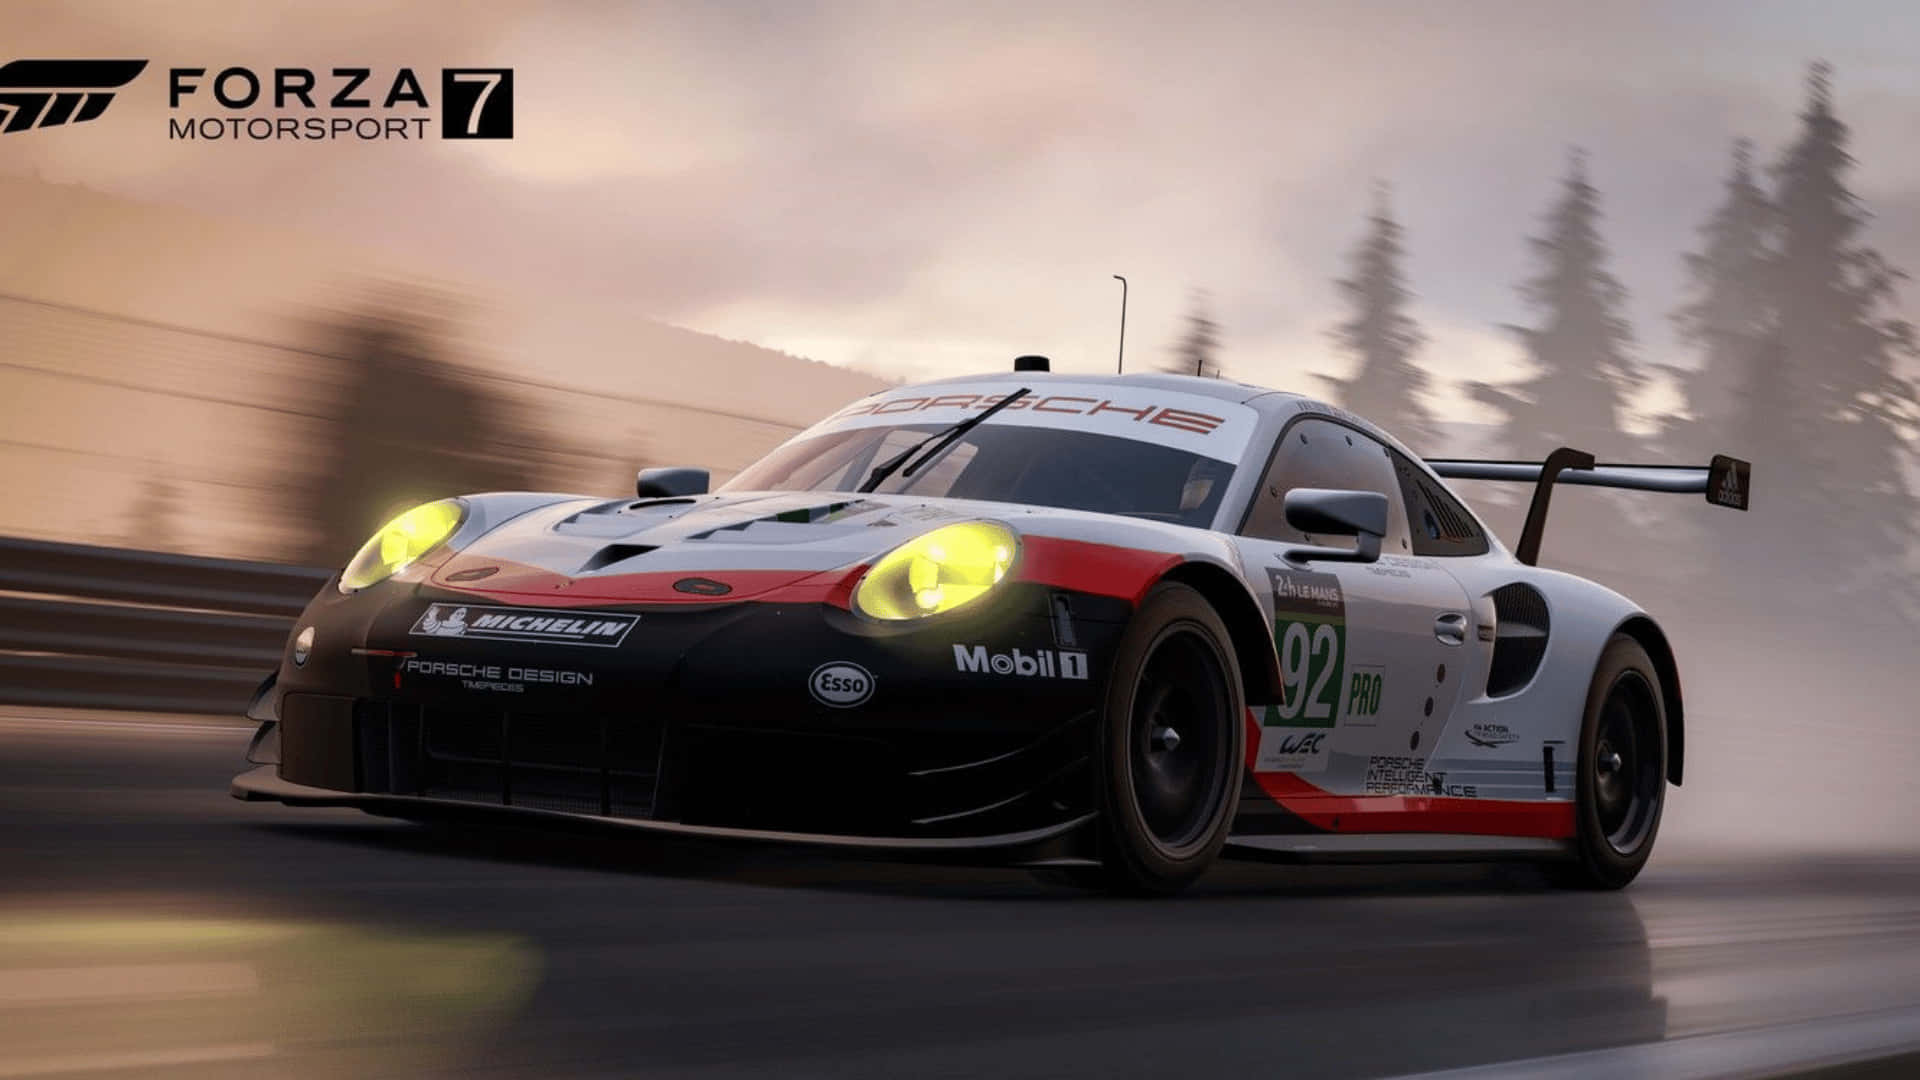 Feel the thrill of authentic motorsport with Forza Motorsport 7